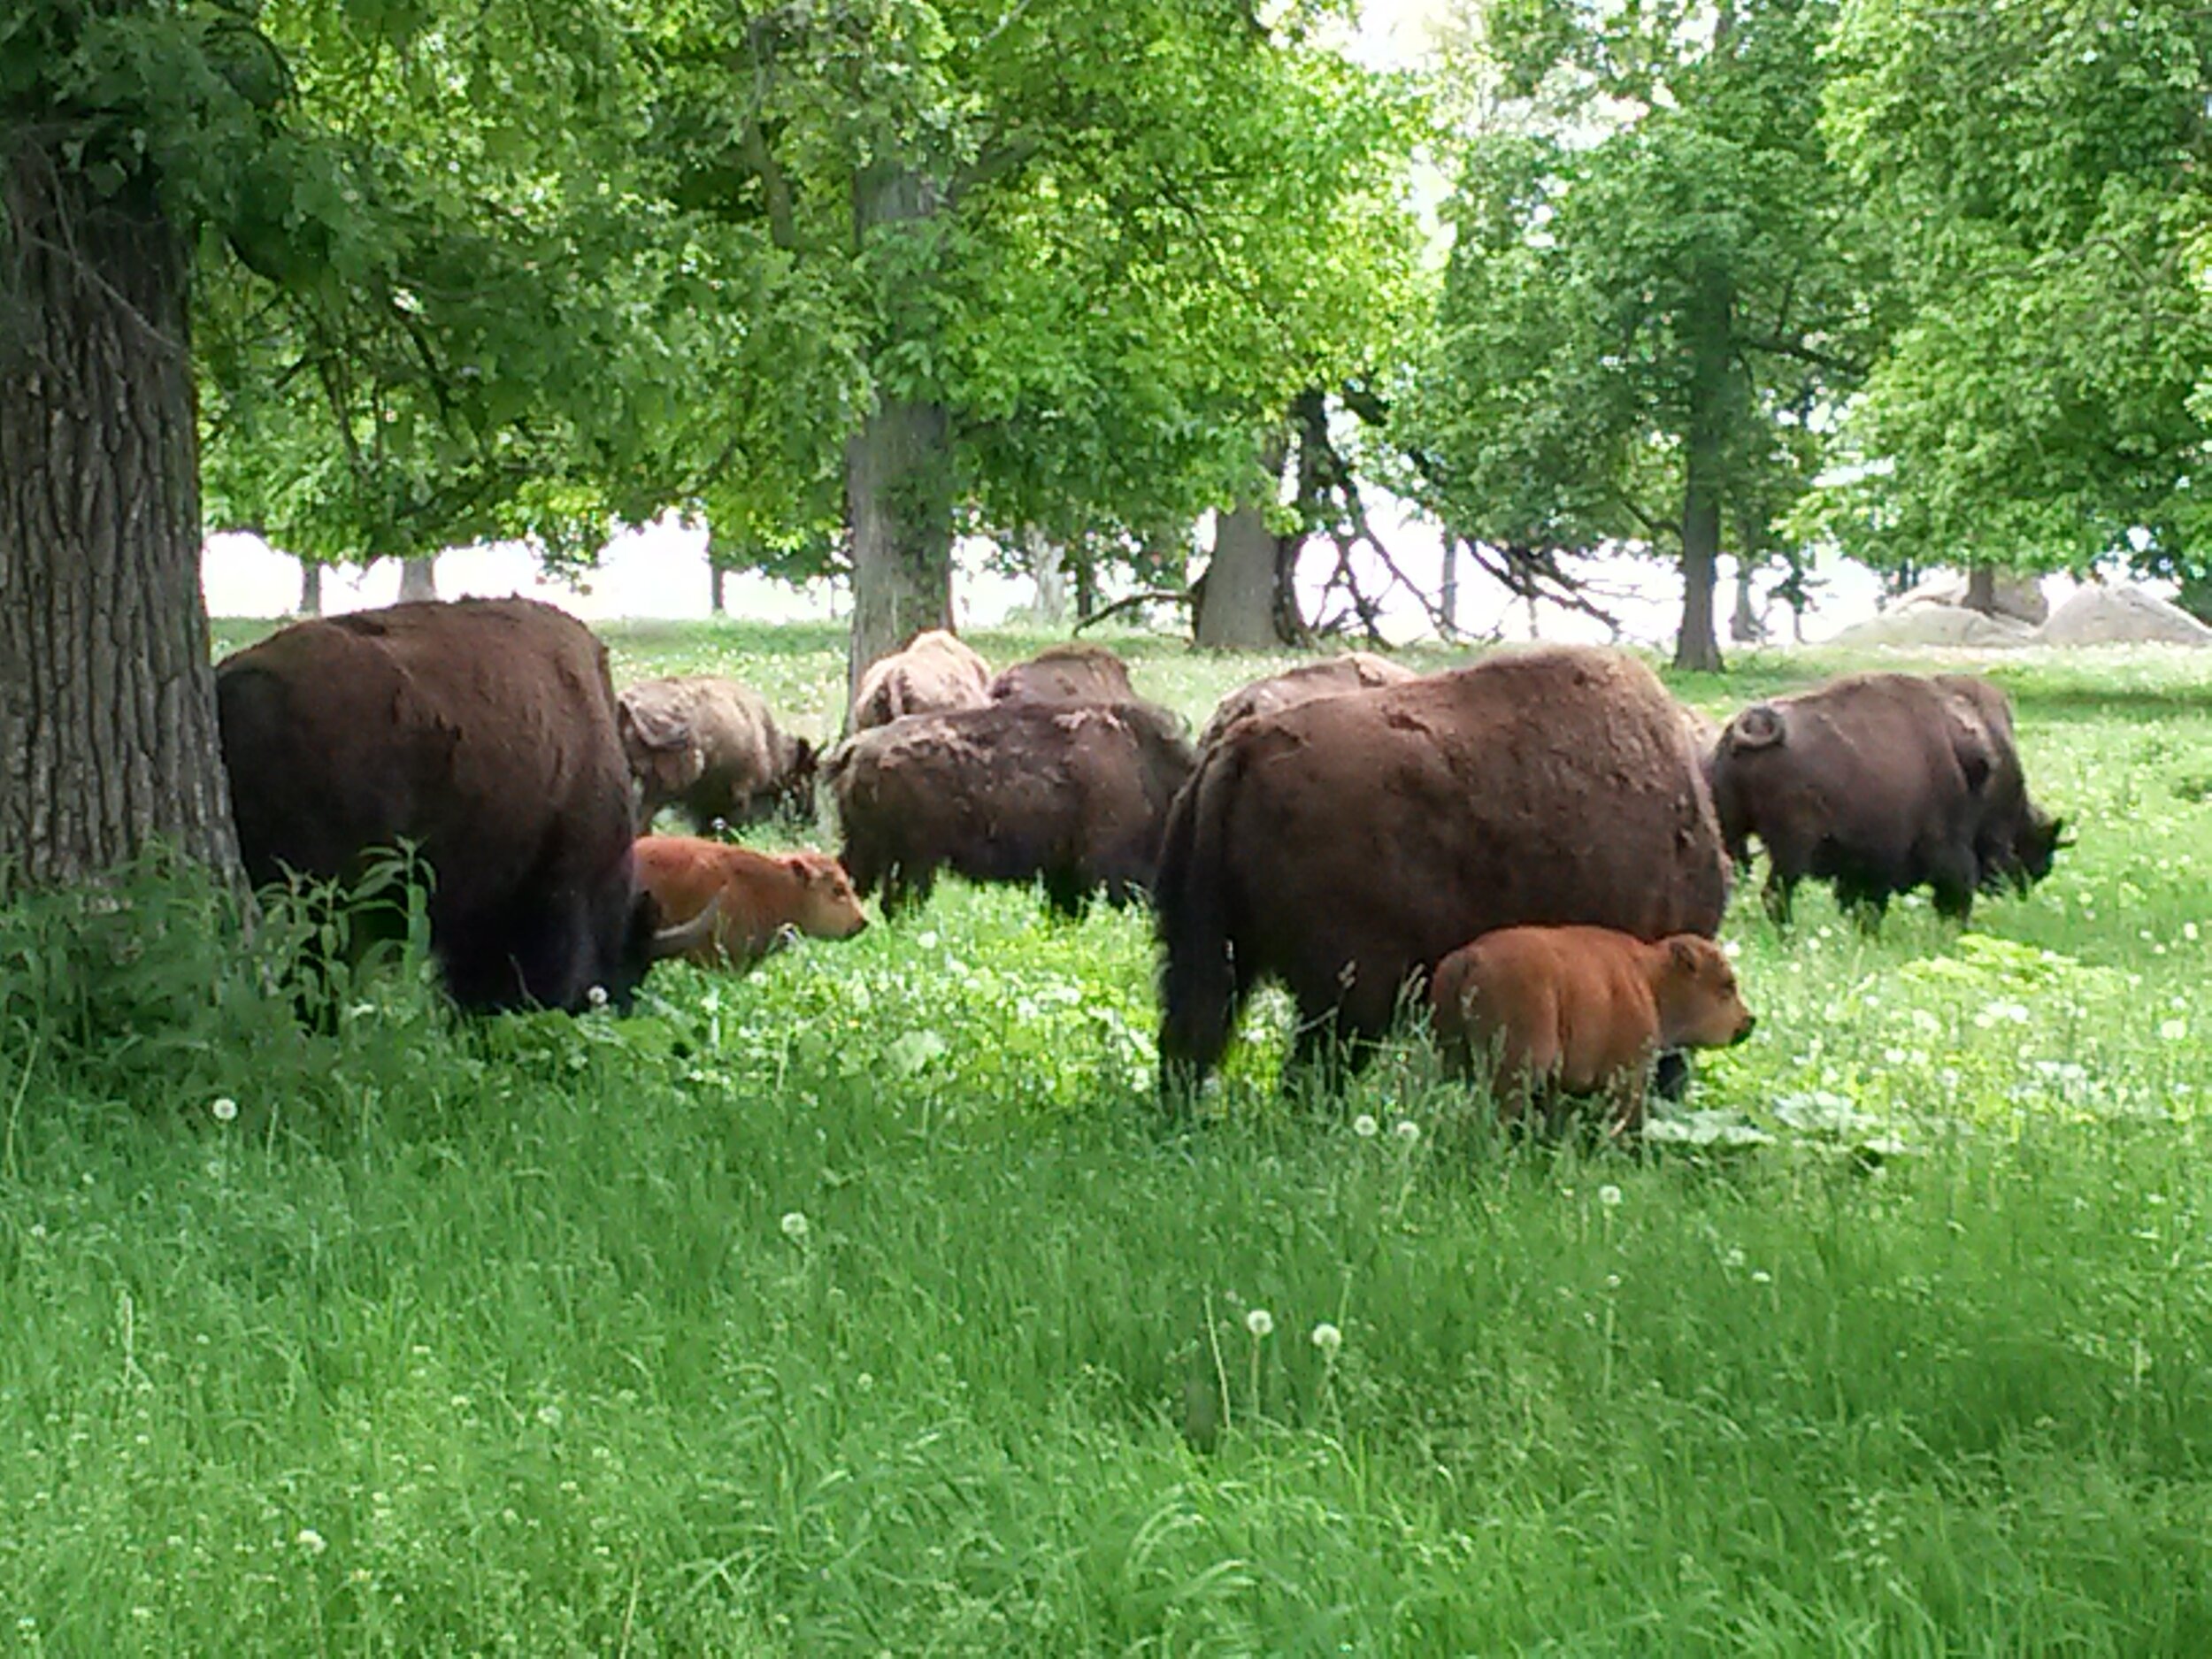 Field of bison near trees